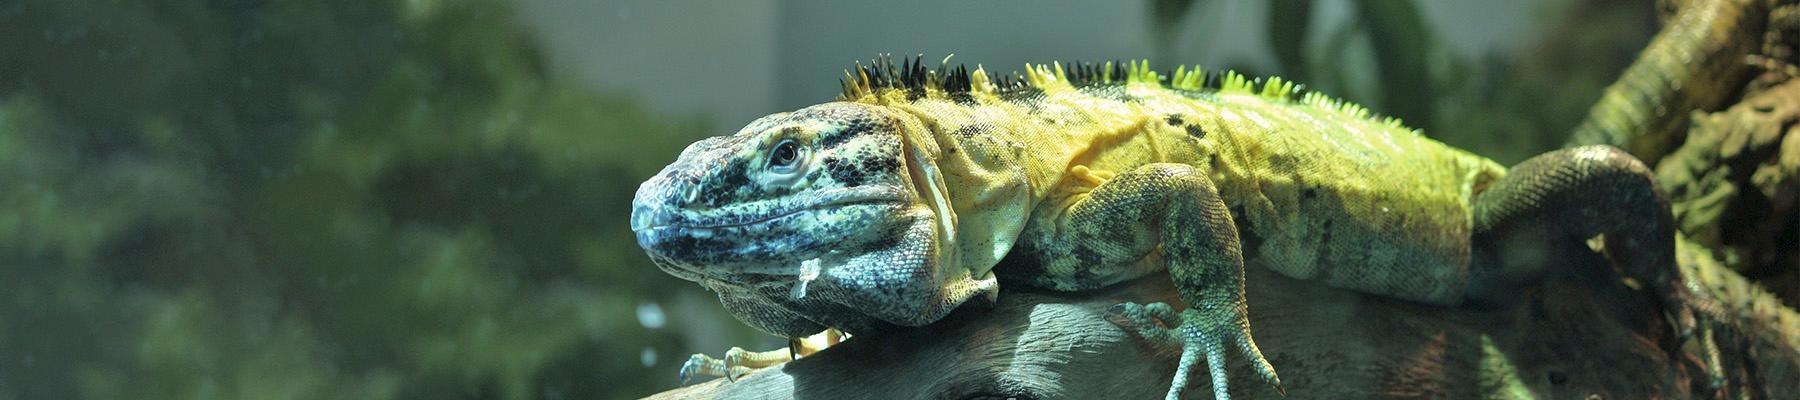 Mexican Spiny-tailed Iguana Ctenosaura pectinata, proposed for inclusion in Appendix II. Photo: Postdlf / CC BY-SA 3.0